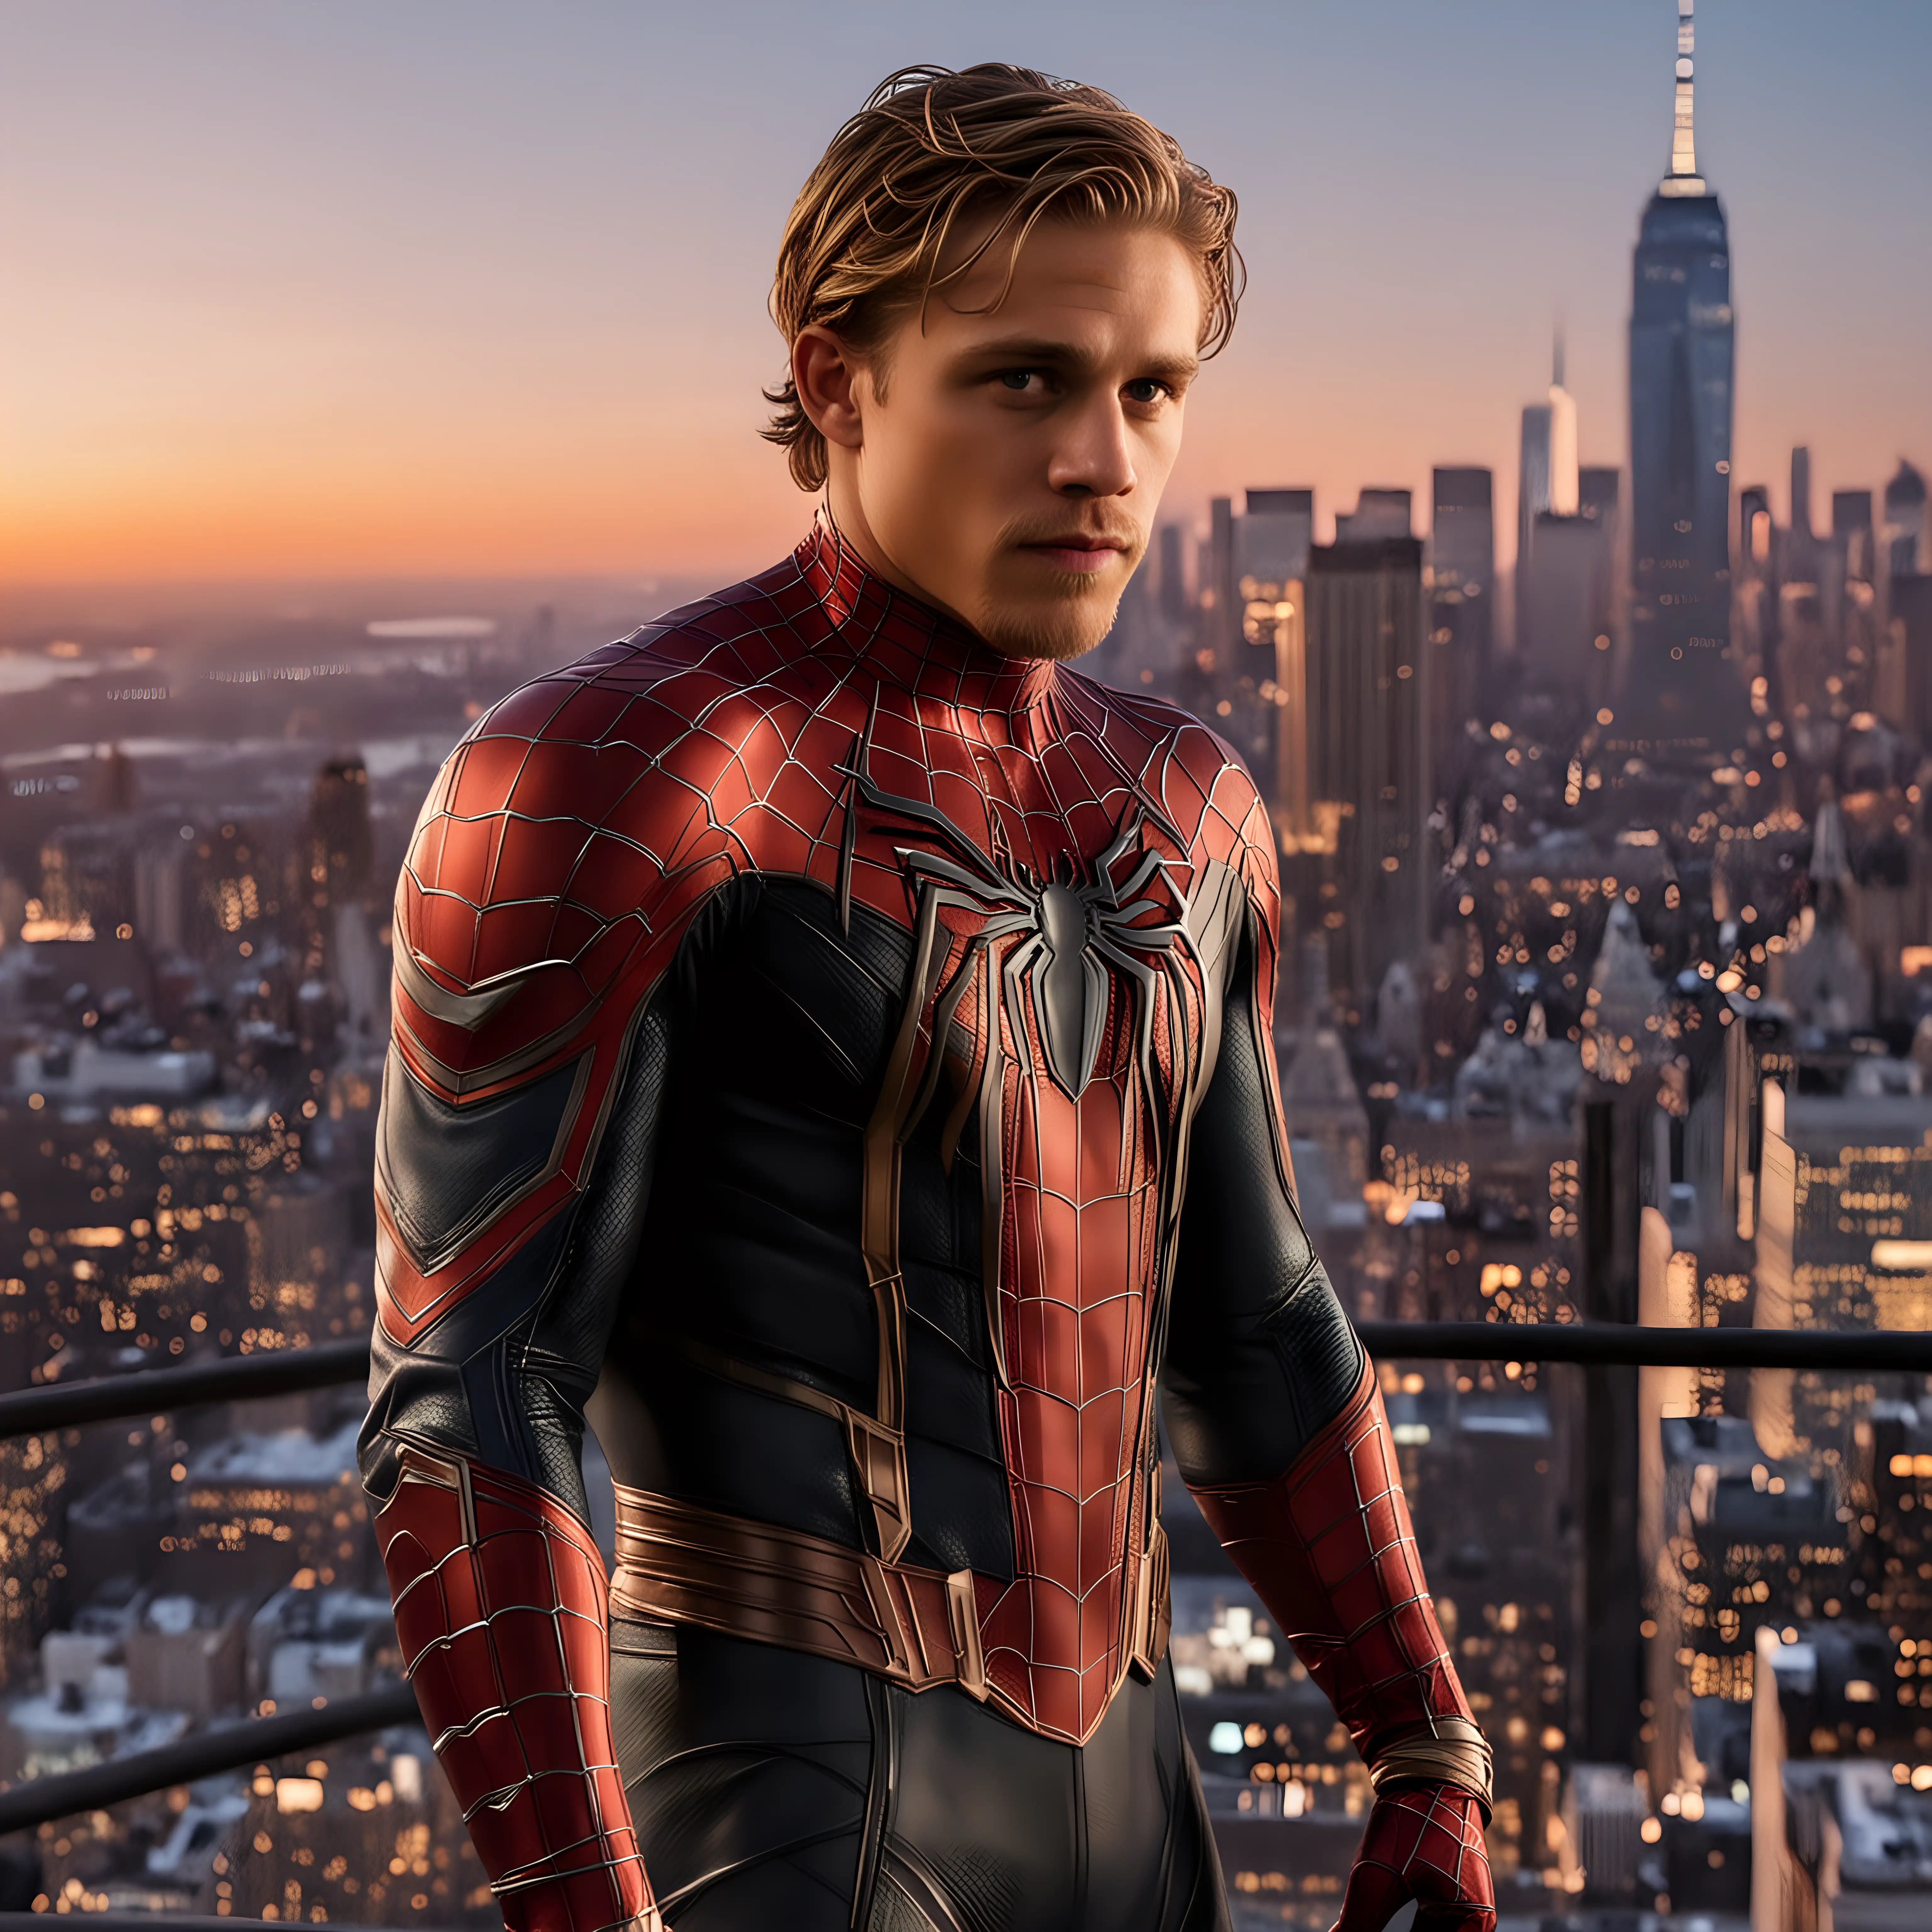 Young Charlie Hunnam, spider-man outfit, no mask, New York skyline, sunset